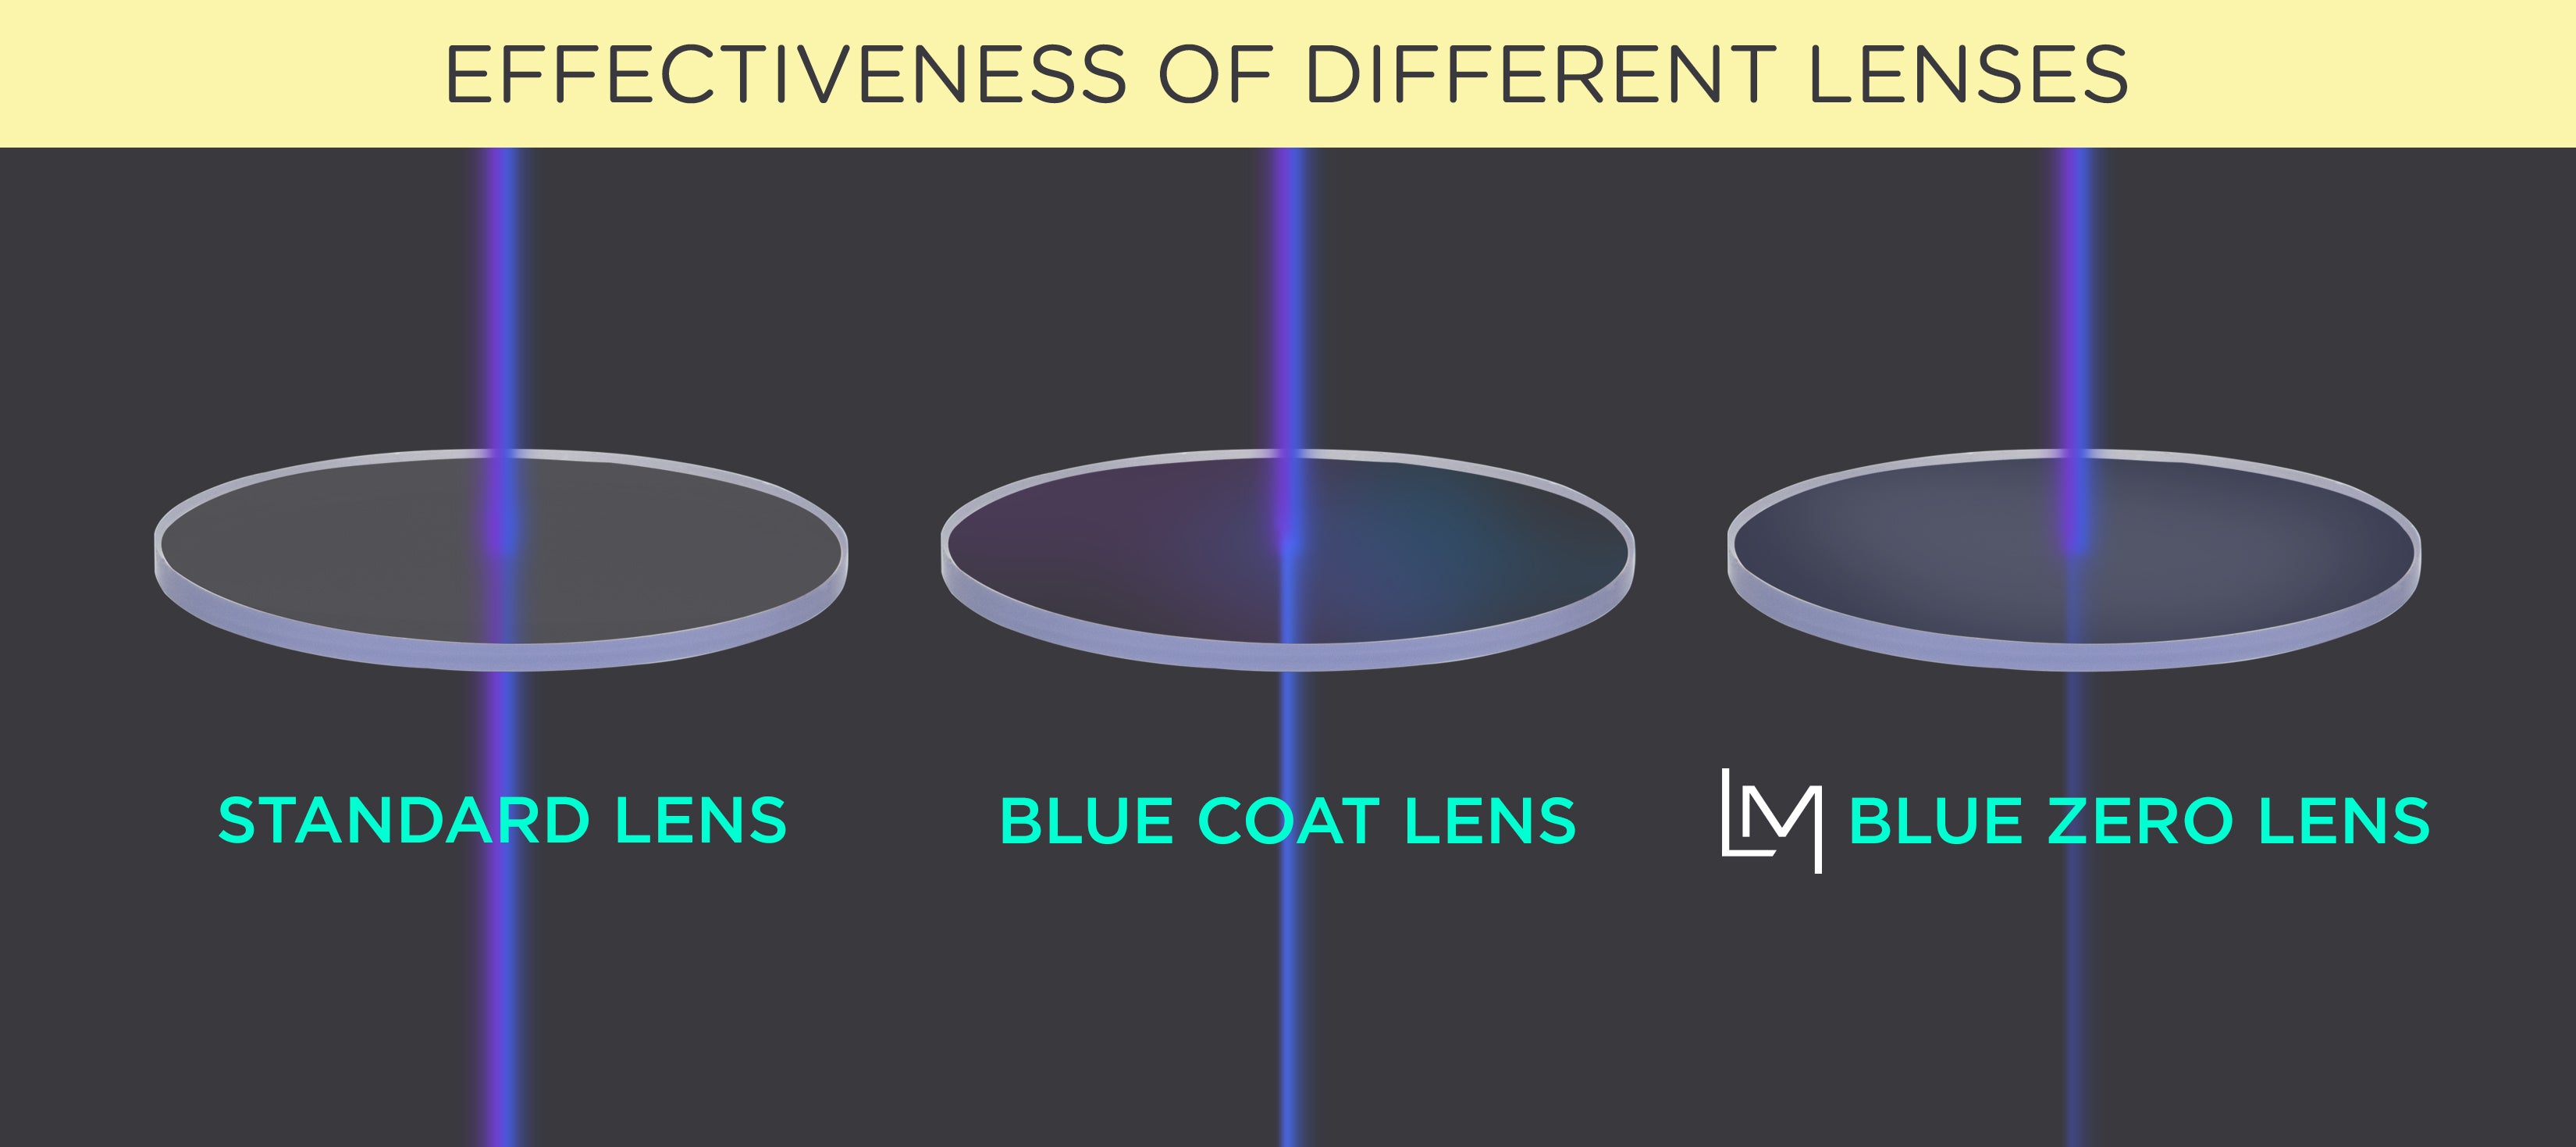 Effectiveness of Different Lenses